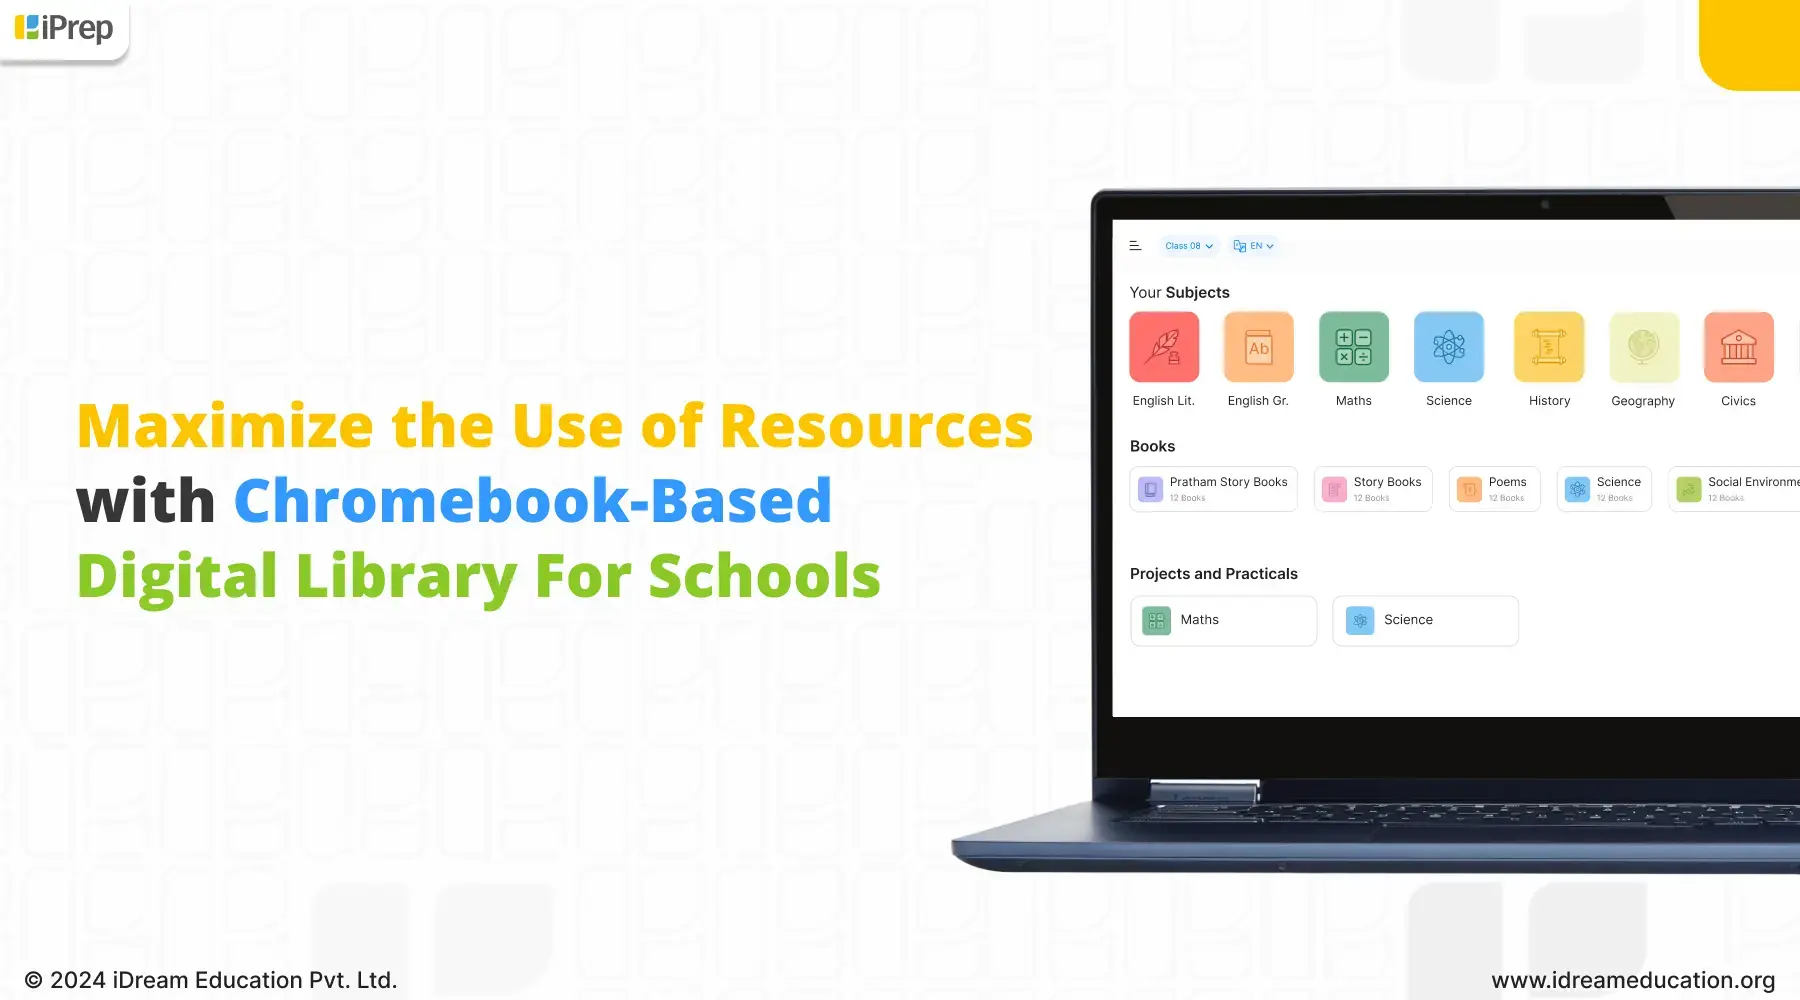 An image highlighting Chromebook-based-digital-library-by iDream Education to maximize the use of resources in schools